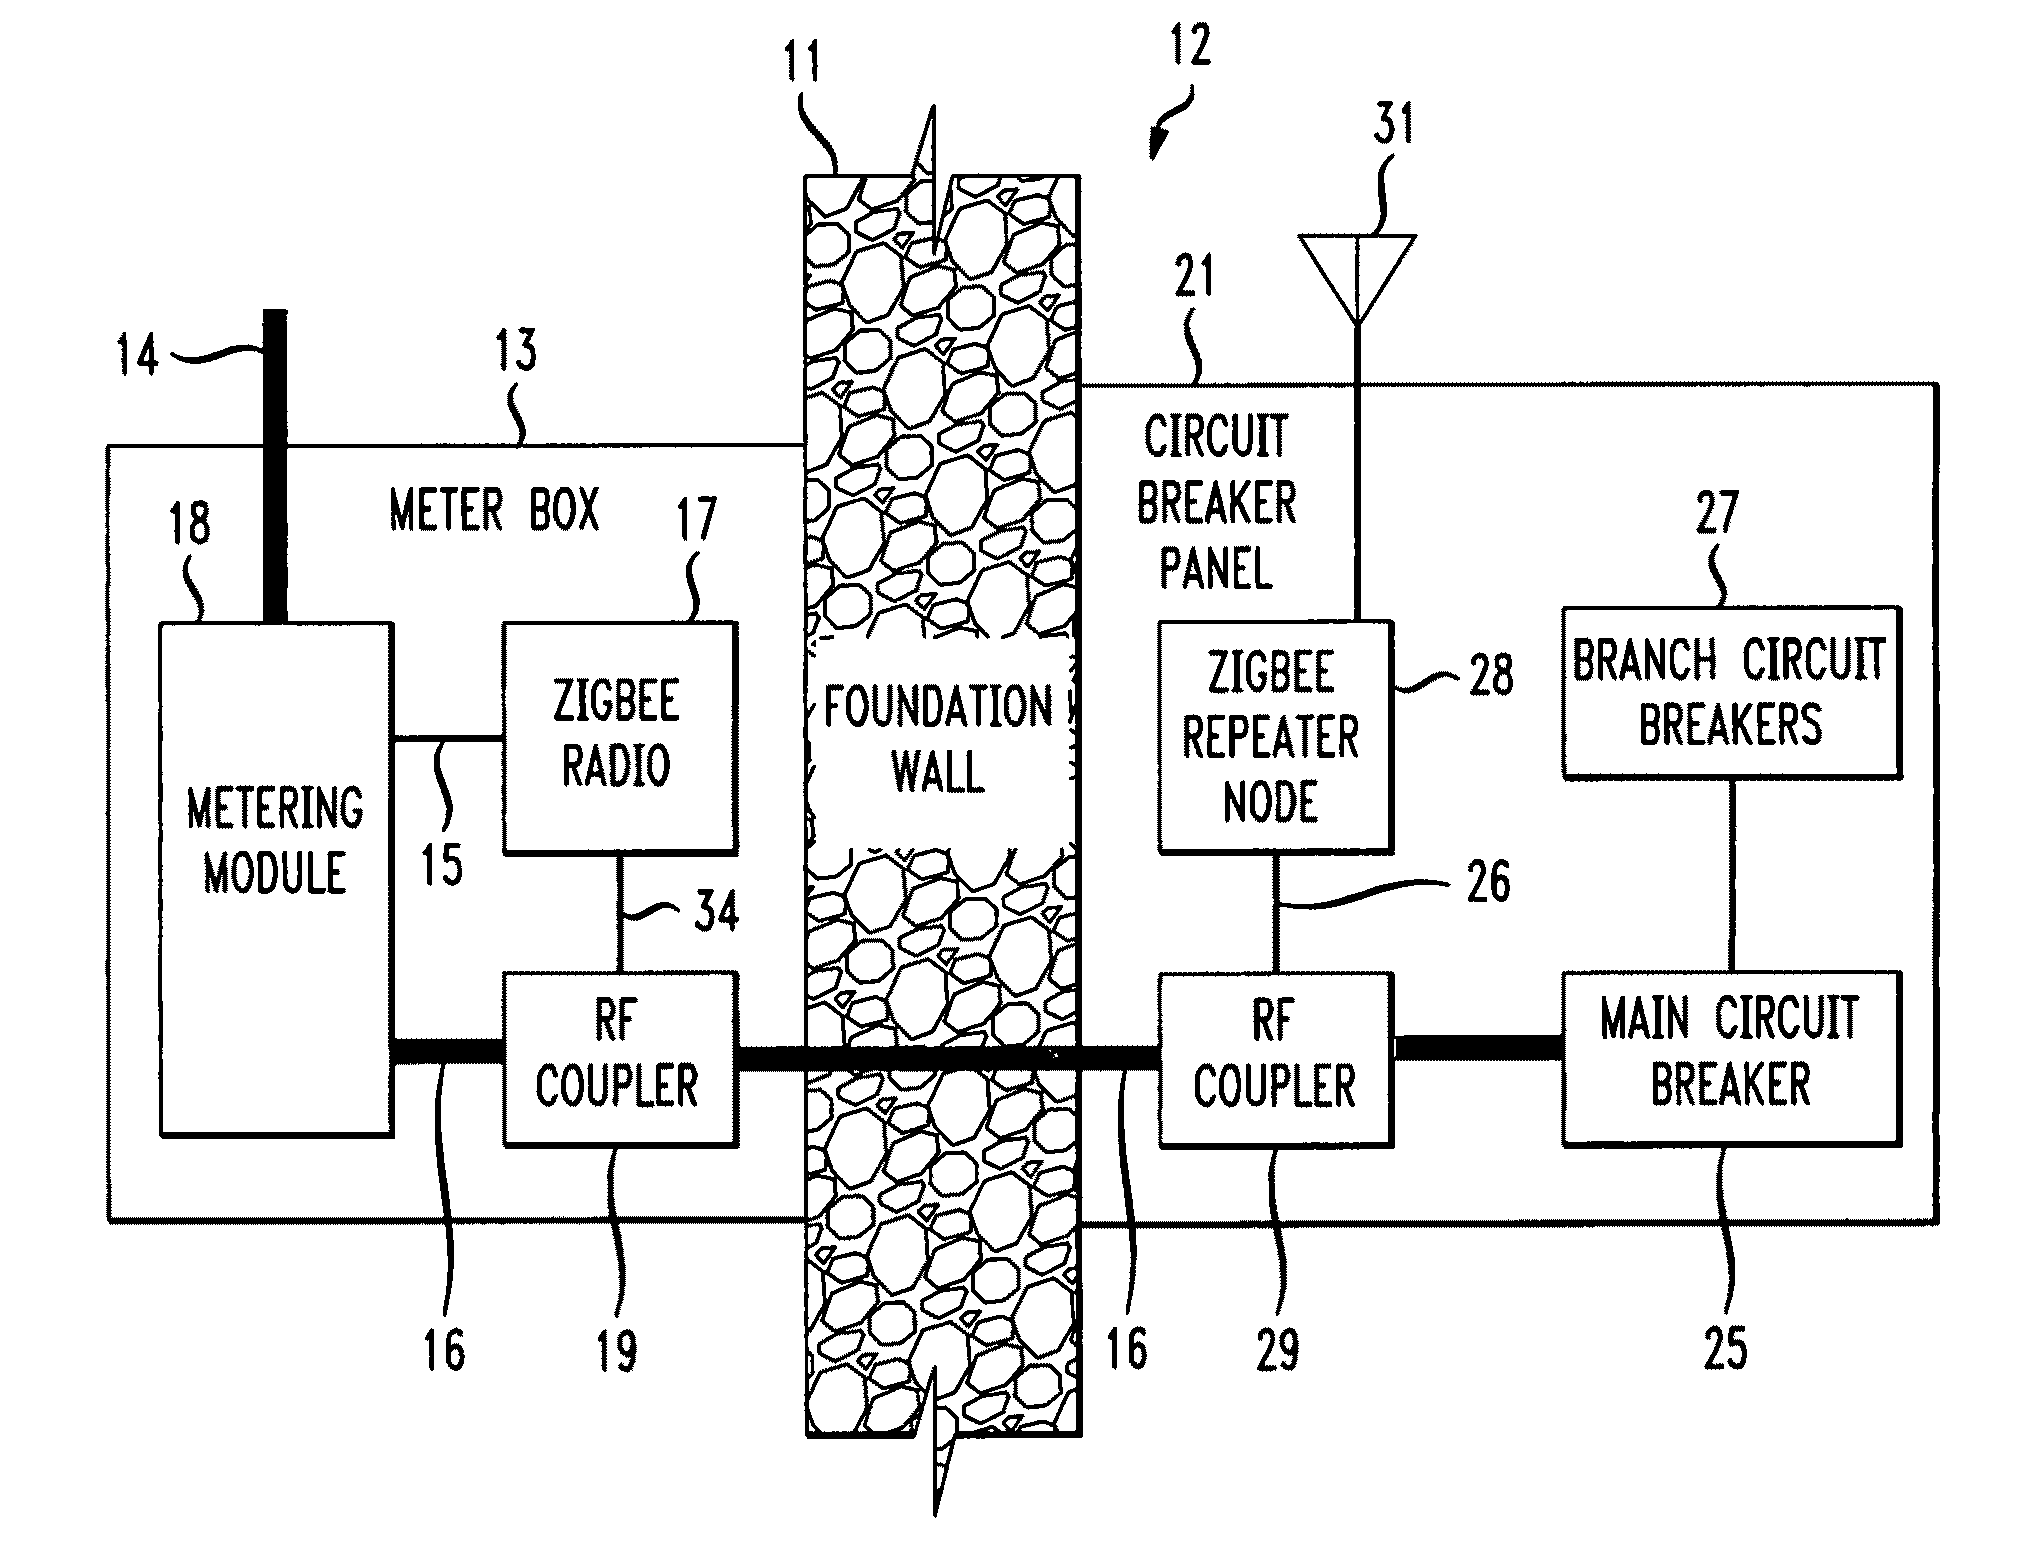 Using an electric power cable as the vehicle for communicating an information-bearing signal through a barrier